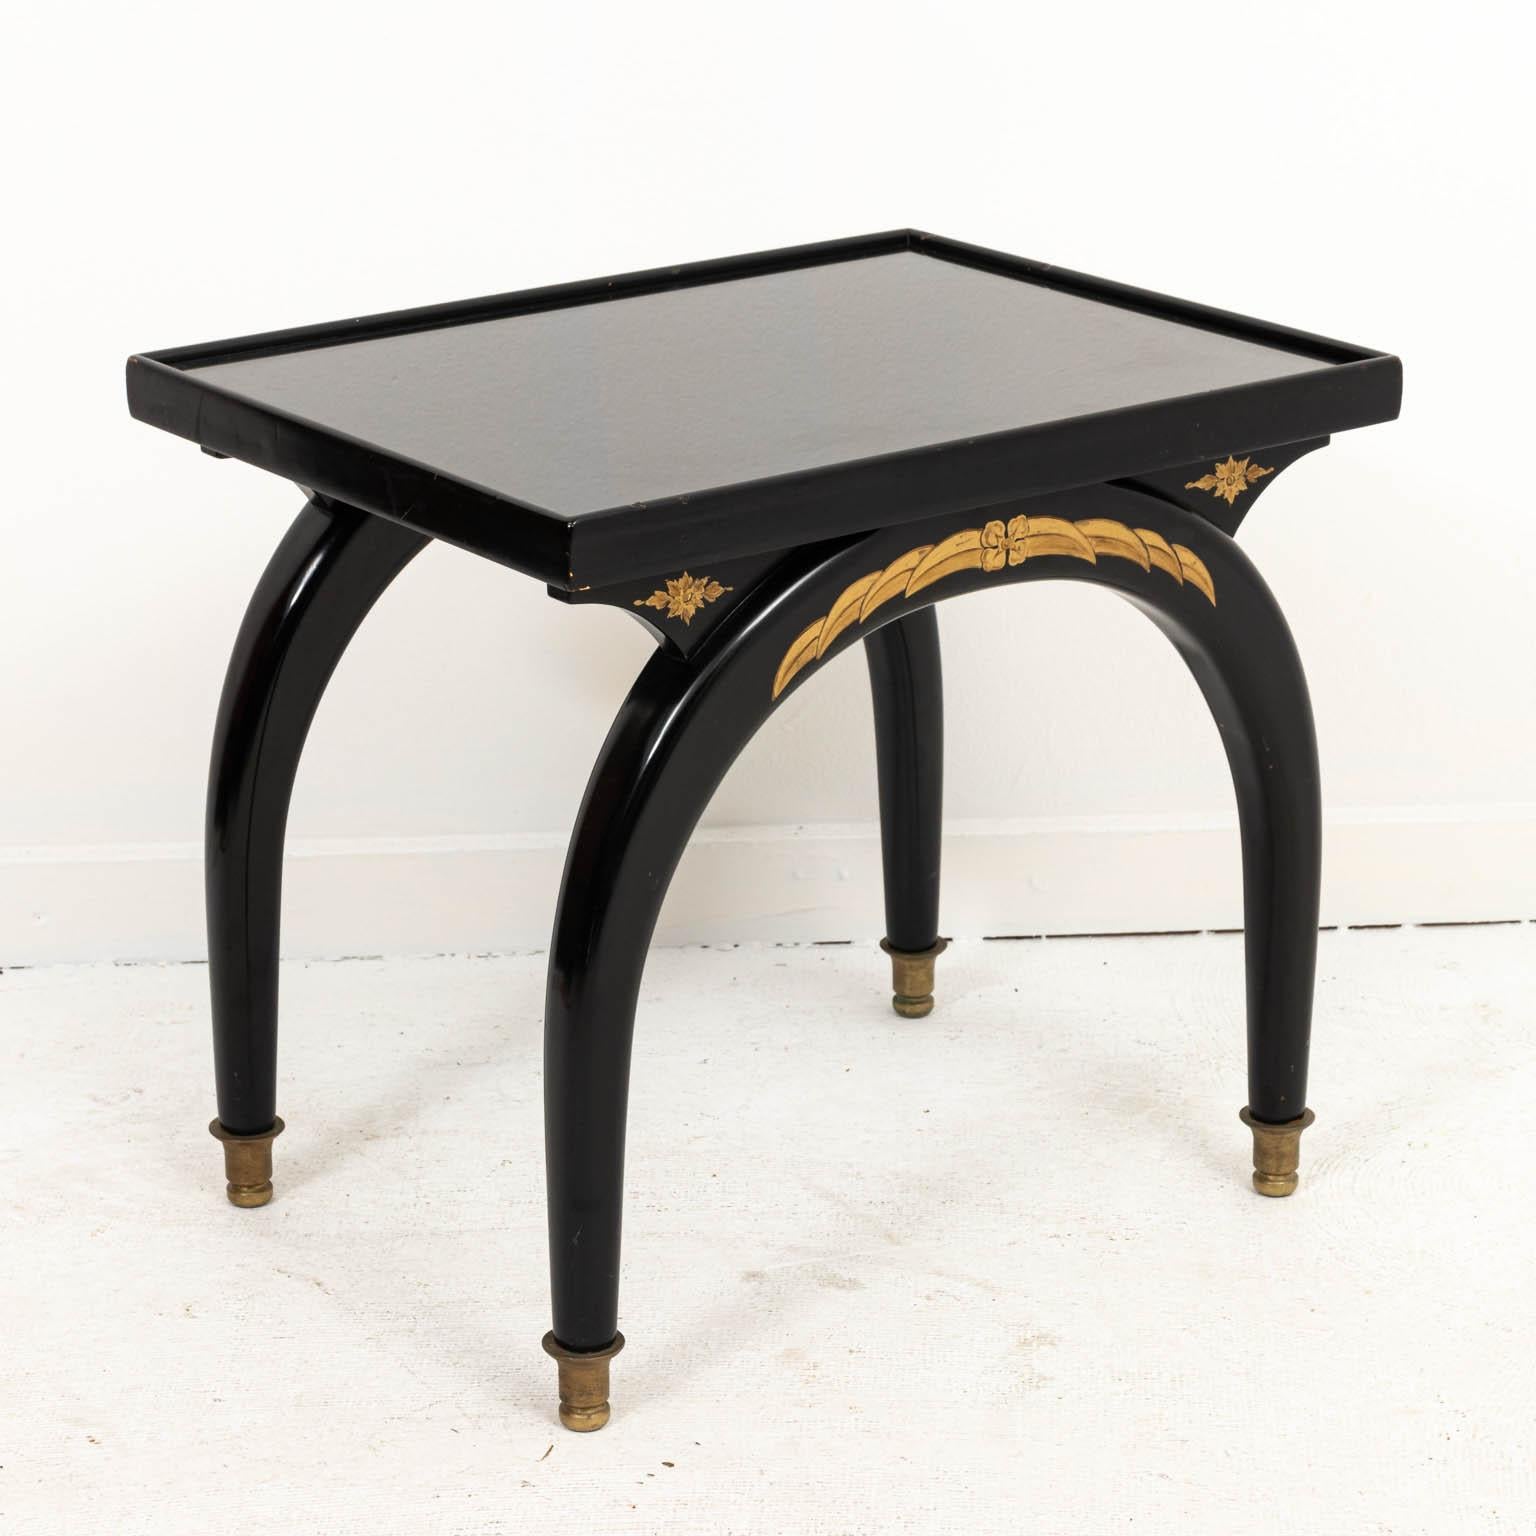 Pair of Art Deco Style Black Rectangular Side Tables with Glass Top 1